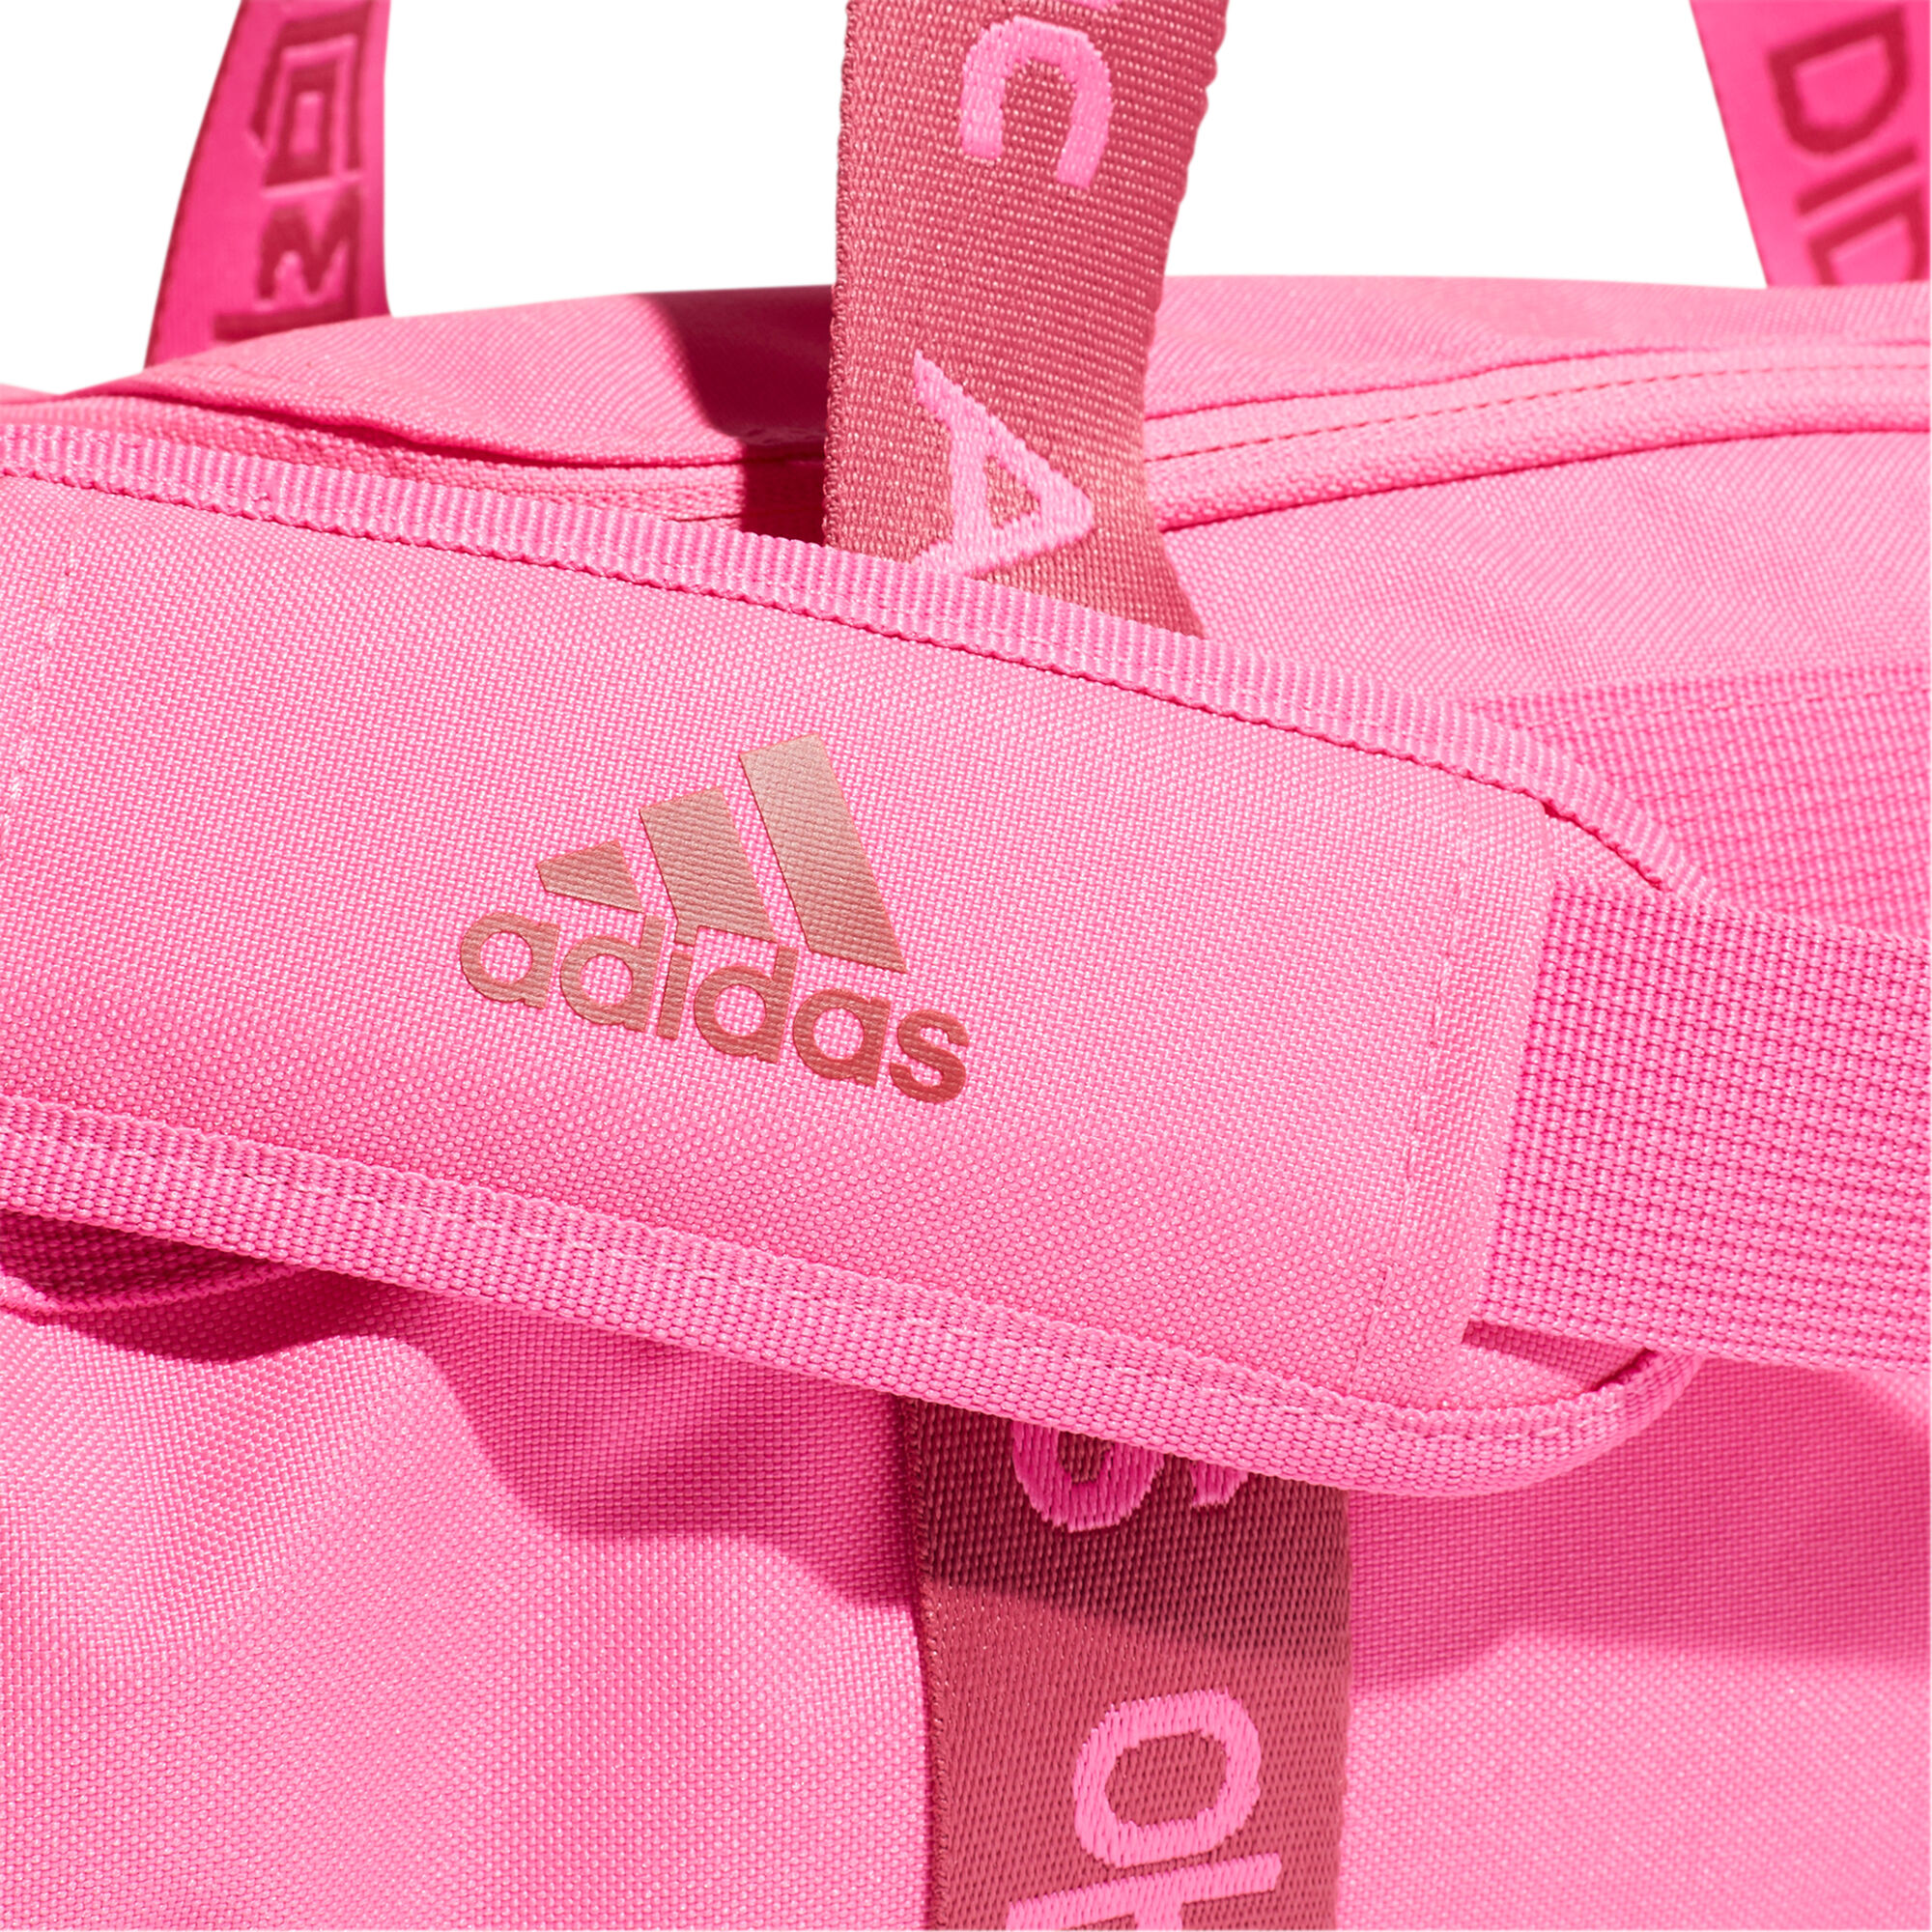 Buy adidas 4 Athletes Duffle Sports Bag Pink online | Tennis Point COM